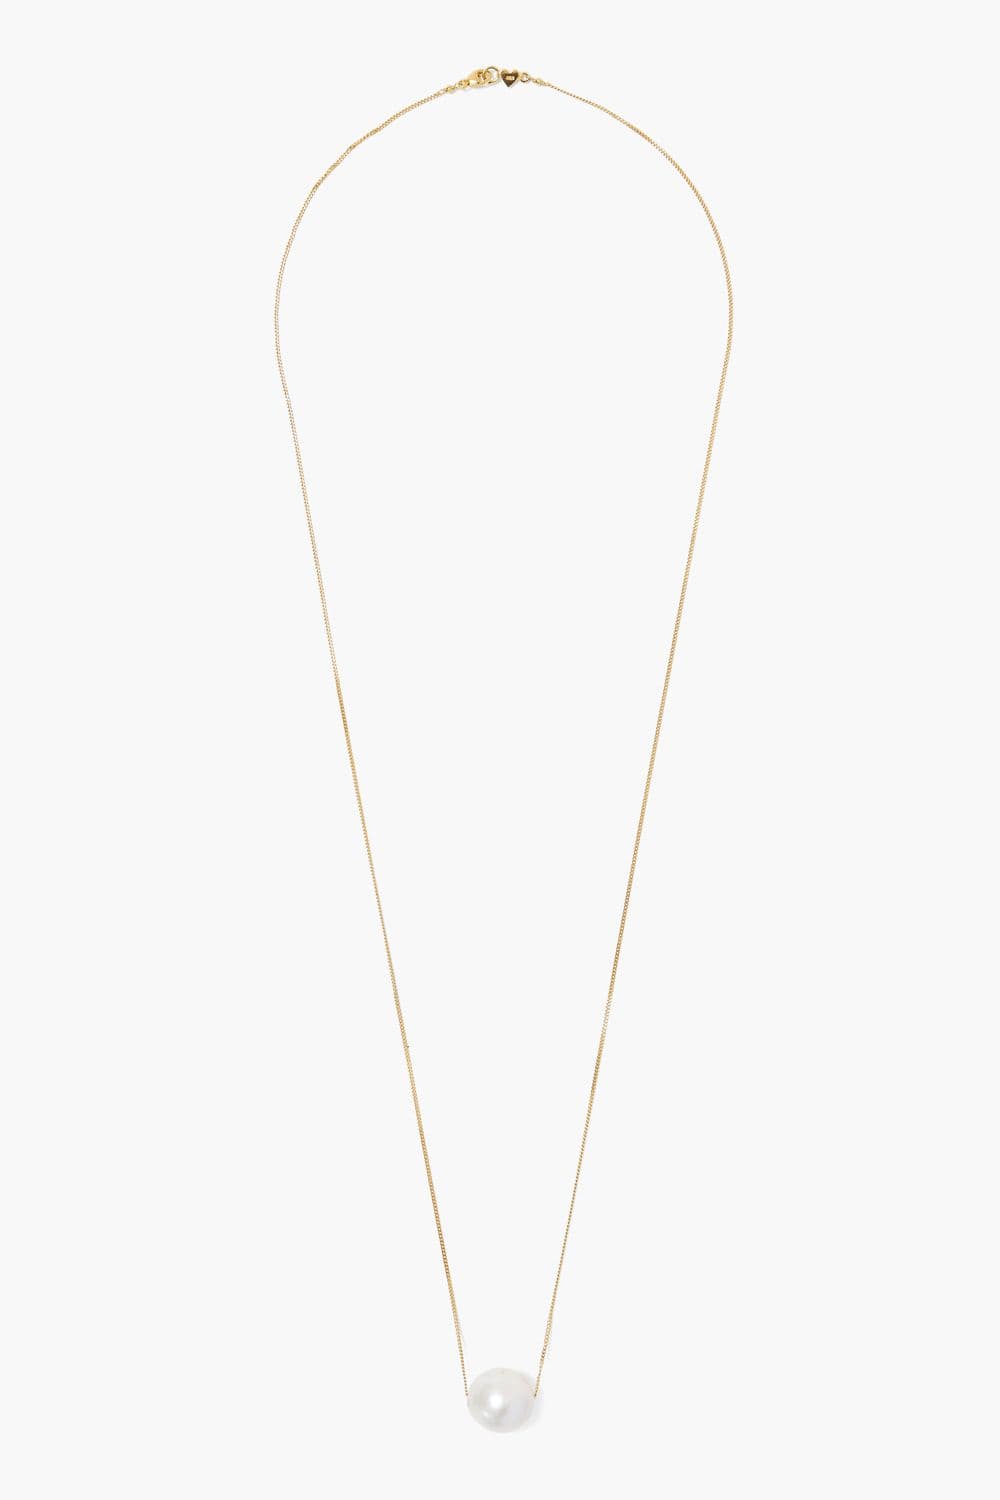 NKL-GPL Long White Floating Pearl Gold Necklace